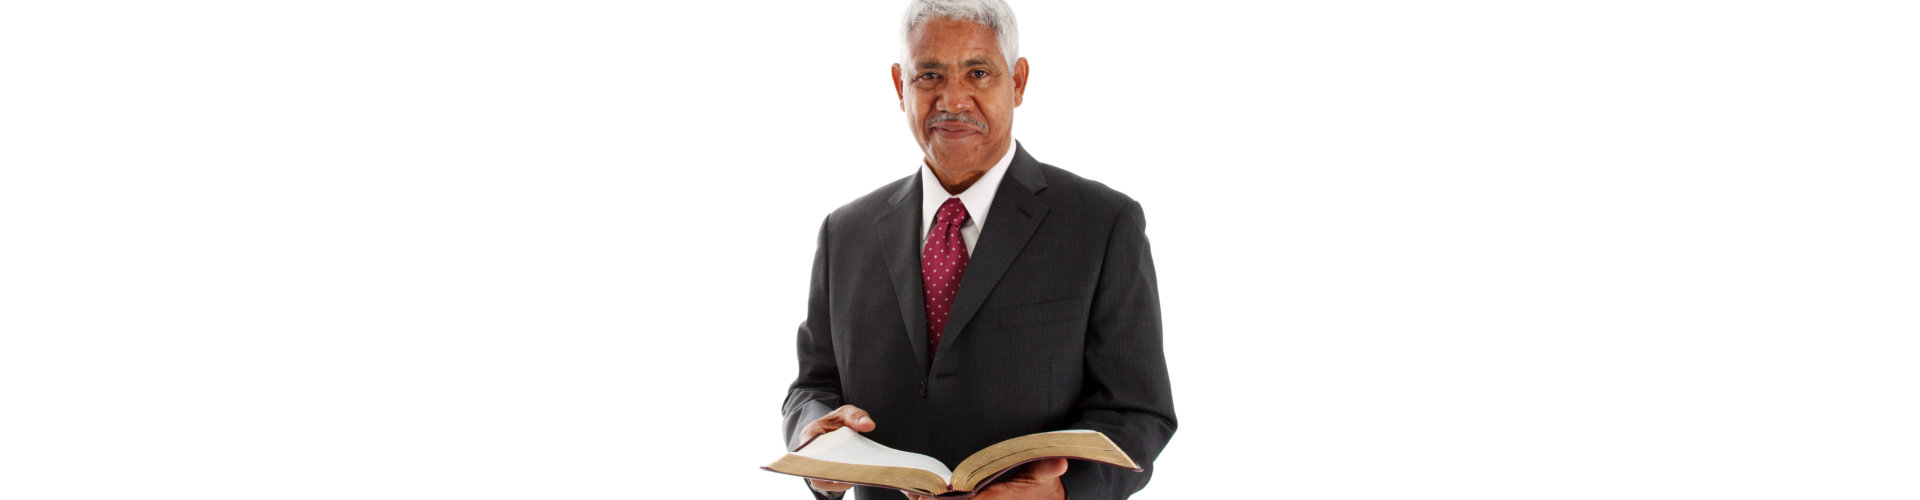 pastor holding a bible